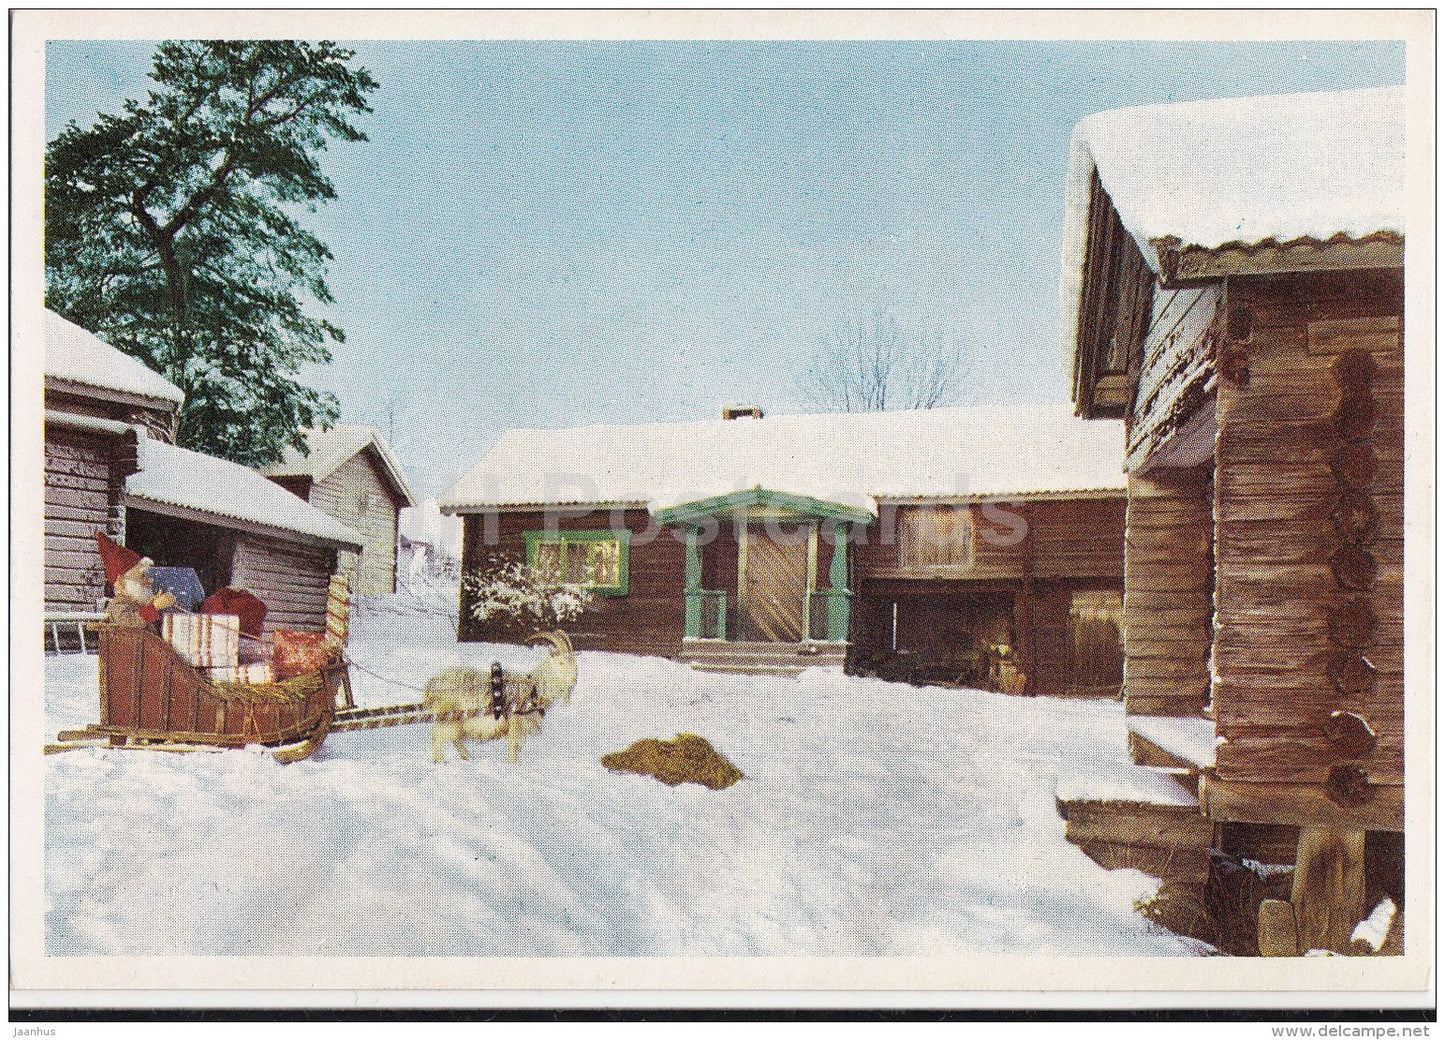 Christmas Greeting Card - sledge - houses - gifts - goat - Sweden - unused - JH Postcards